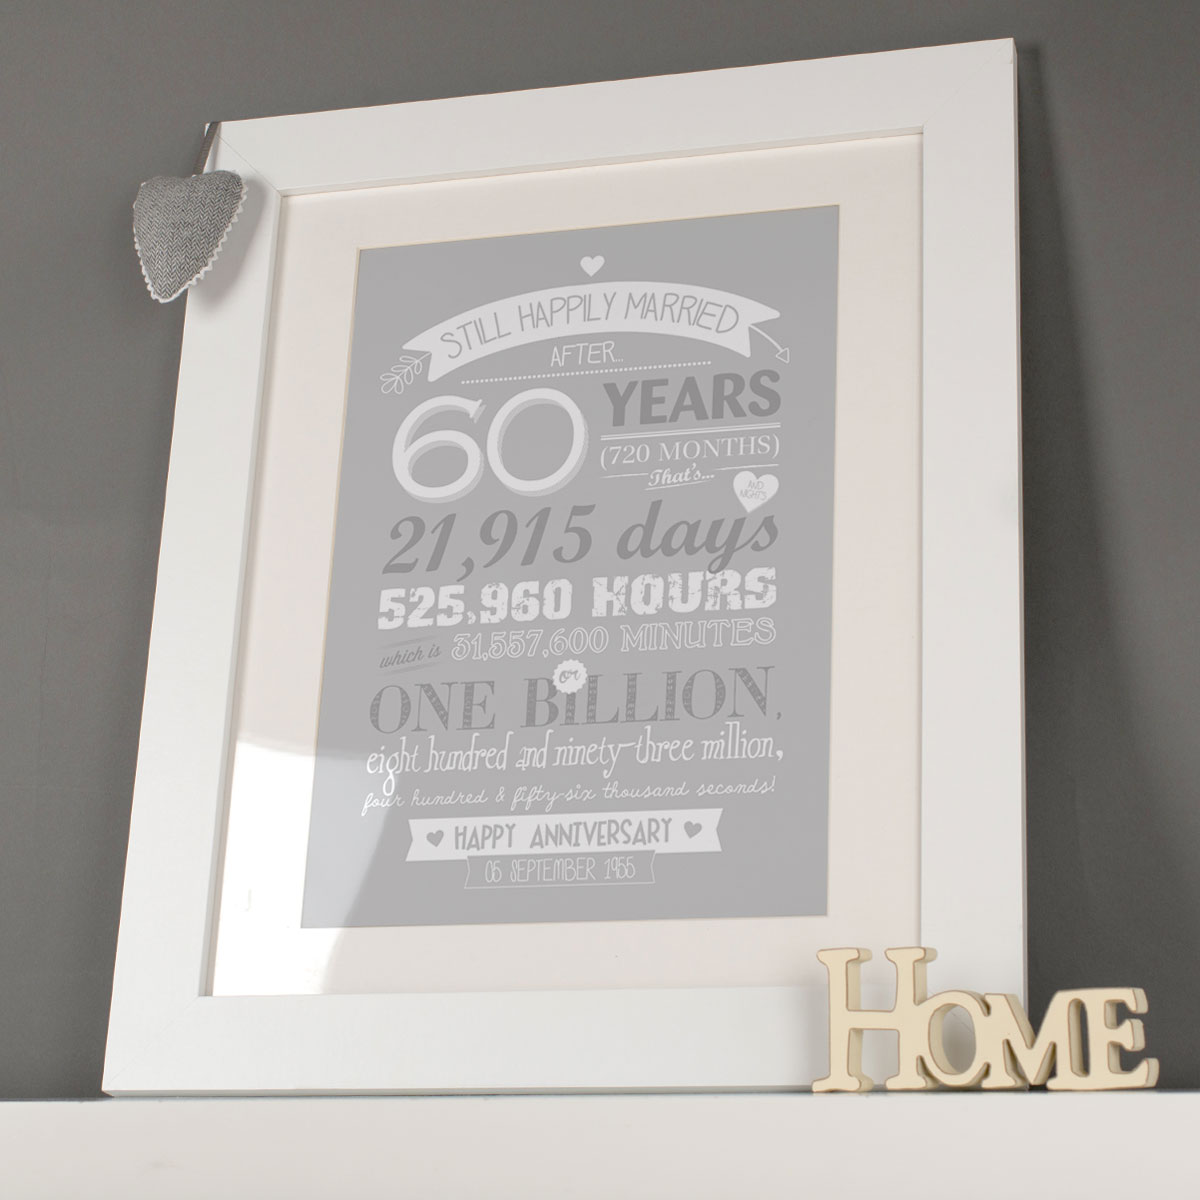 Personalised Framed Print - After 60 Years